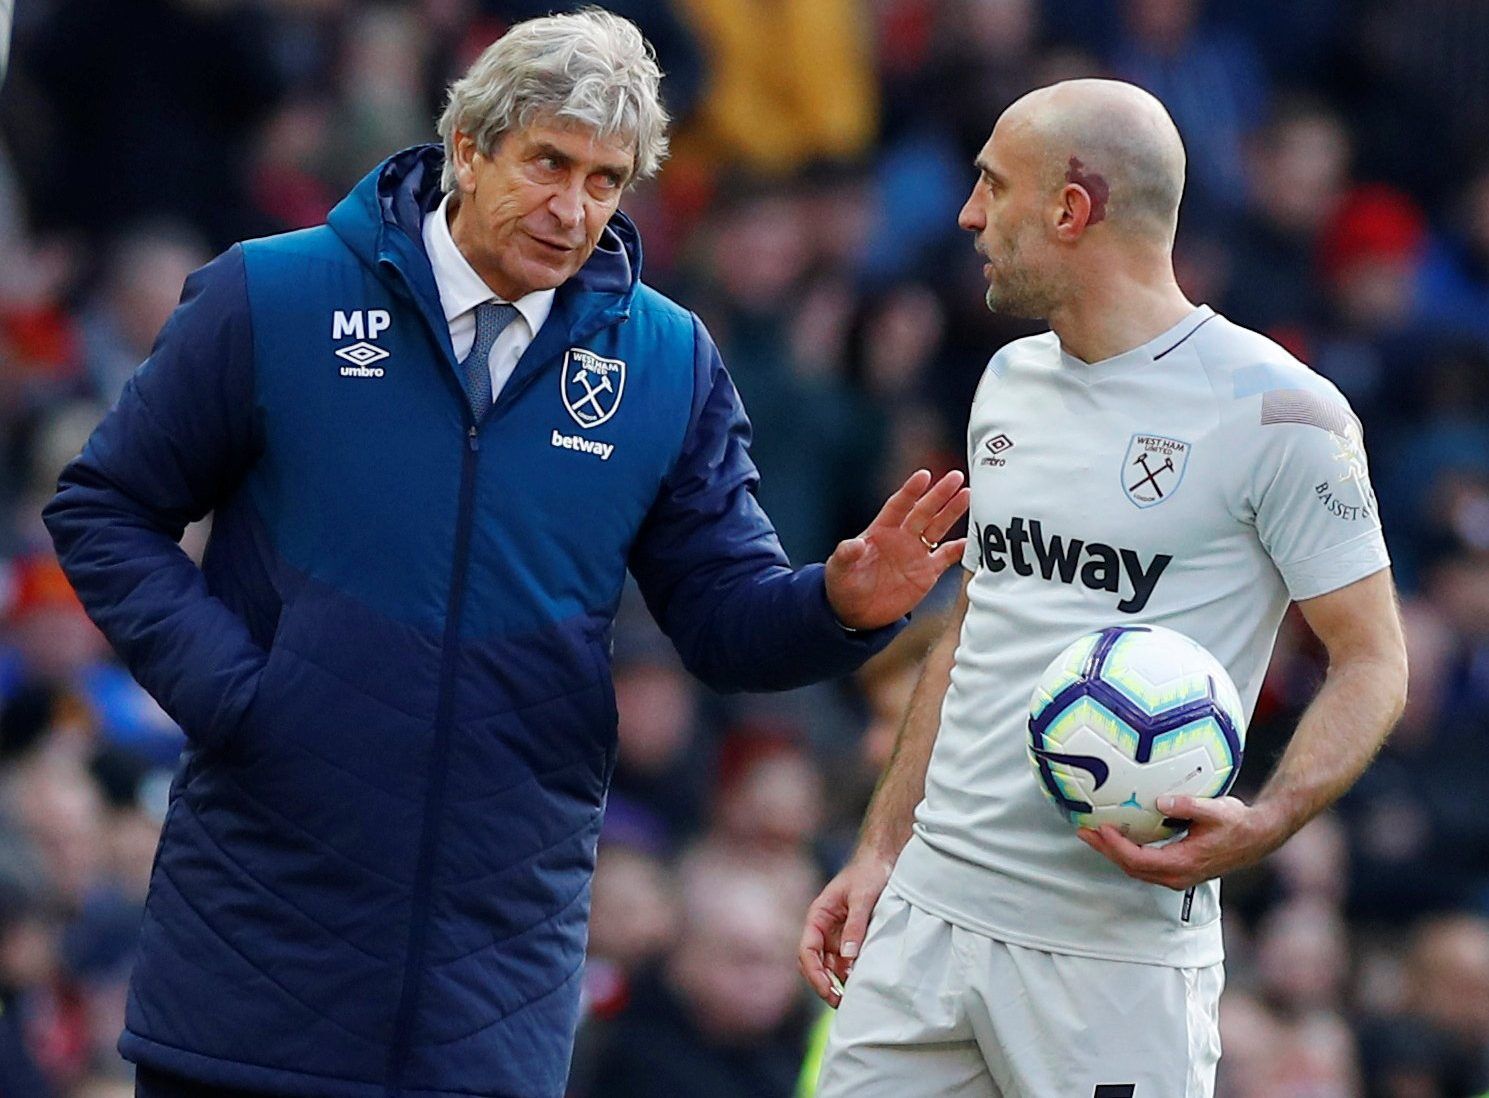 Soccer Football - Premier League - Manchester United v West Ham United - Old Trafford, Manchester, Britain - April 13, 2019  West Ham manager Manuel Pellegrini speaks with West Ham's Pablo Zabaleta                REUTERS/Phil Noble  EDITORIAL USE ONLY. No use with unauthorized audio, video, data, fixture lists, club/league logos or 